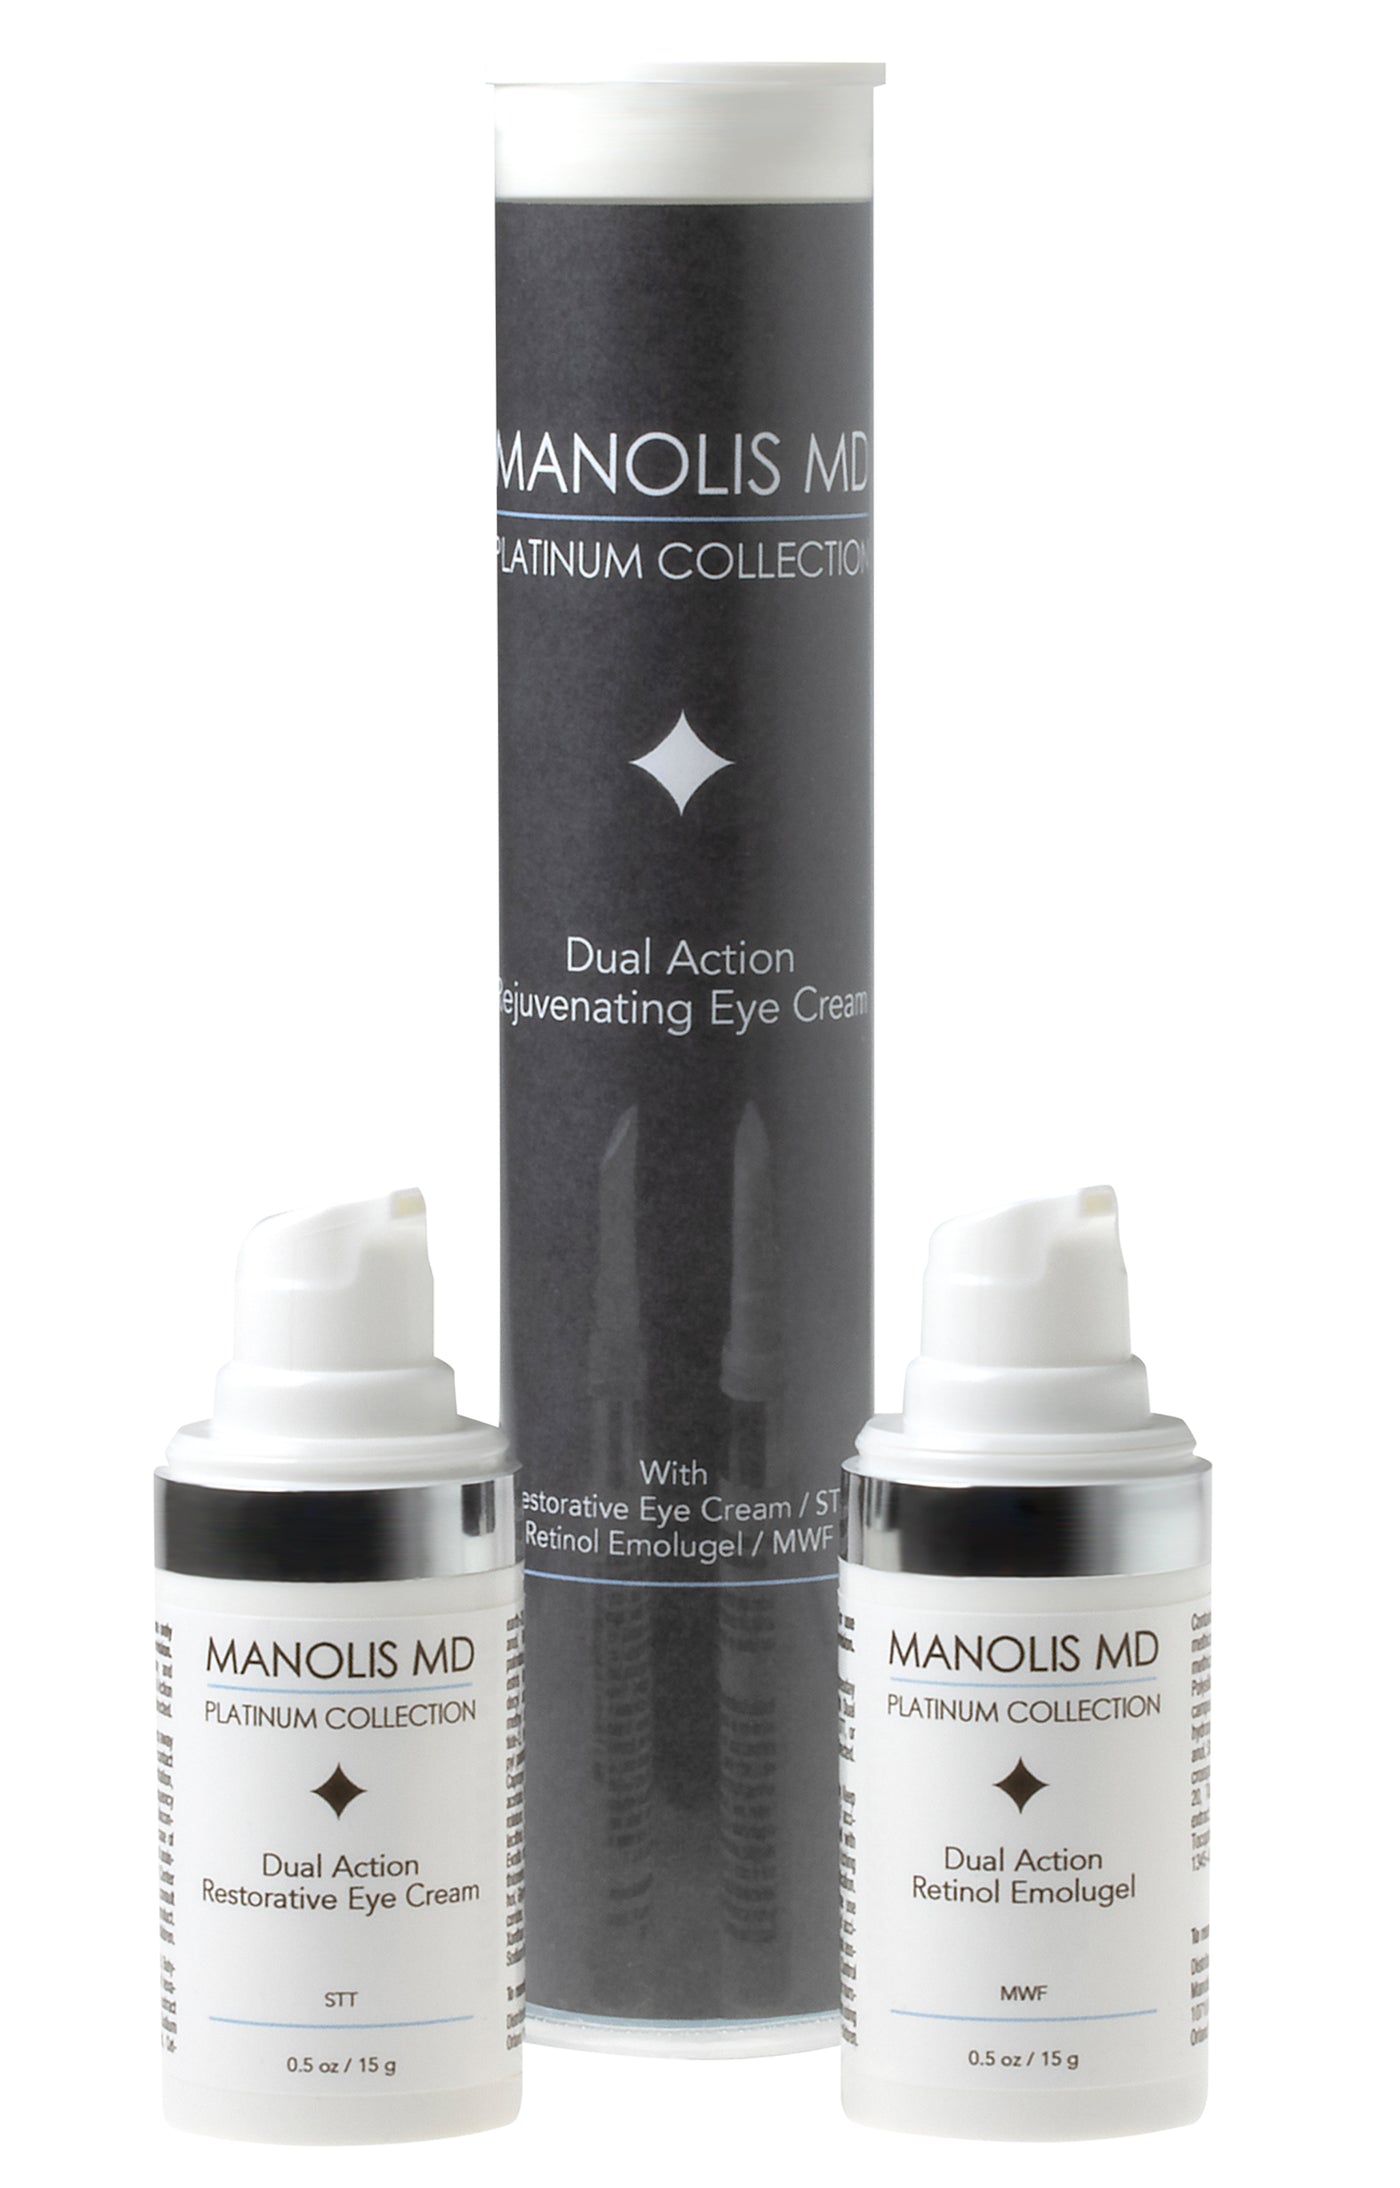 A dual-action intensive eye area product that gently retextures the delicate eye area and helps to improve the appearance of fine lines and wrinkles.